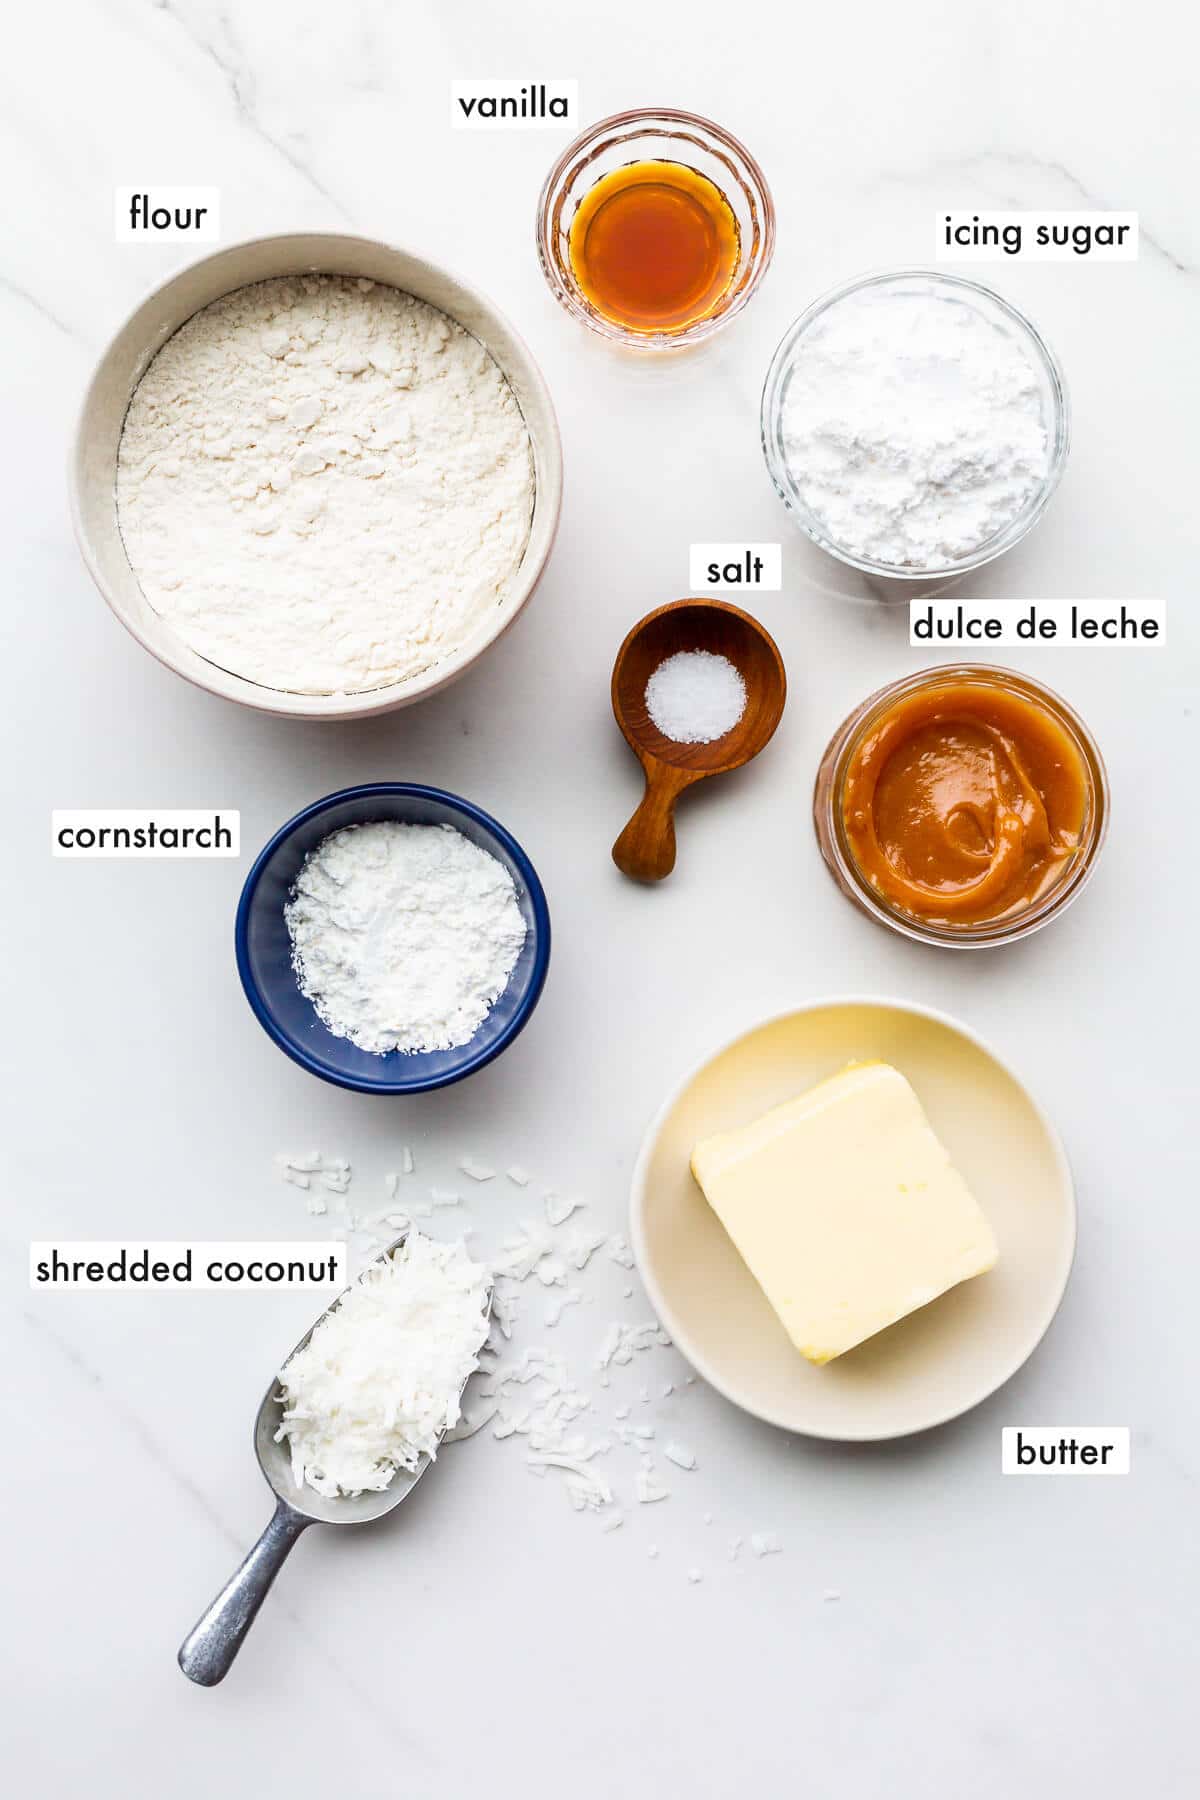 Ingredients to make alfajores cookies measured out and ready to mix.